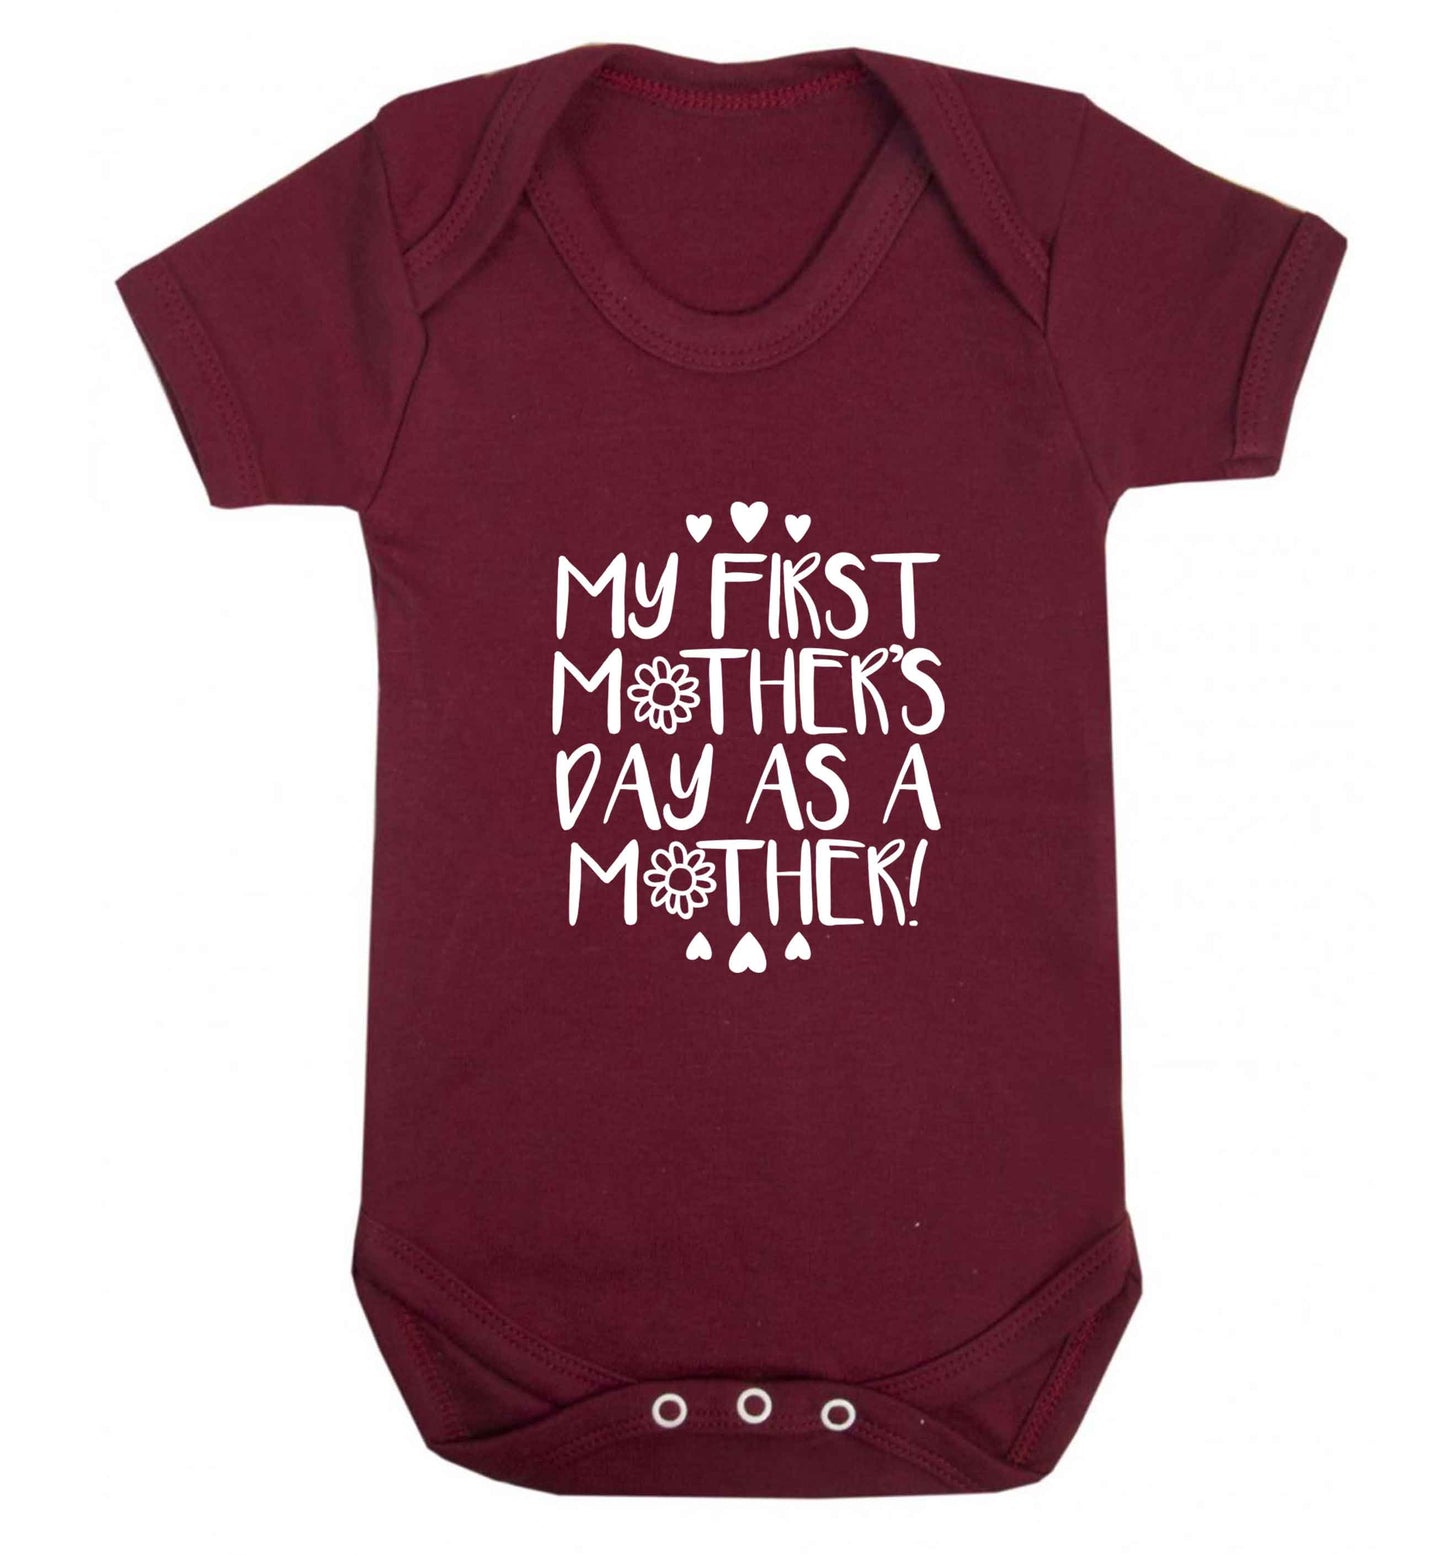 It's my first mother's day as a mother baby vest maroon 18-24 months